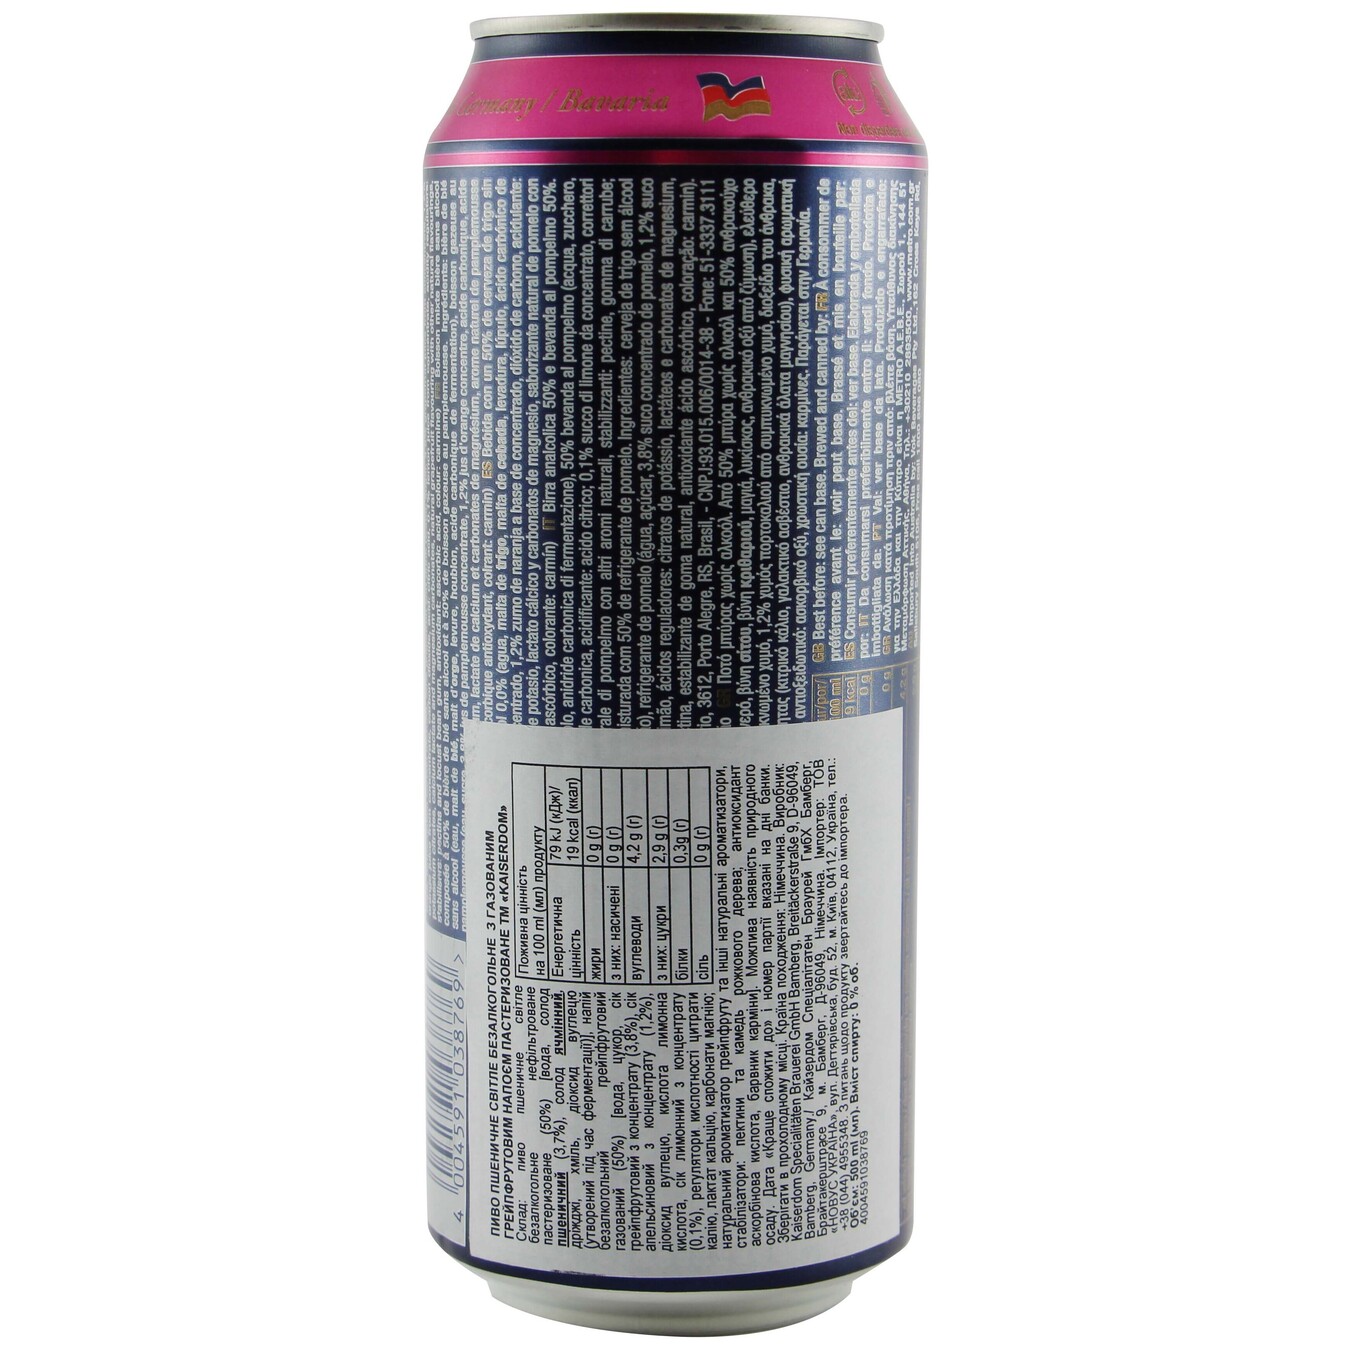 Kaiserdom Pink Grapefruit Non-Alcoholic Beer Сan 0,5l 2